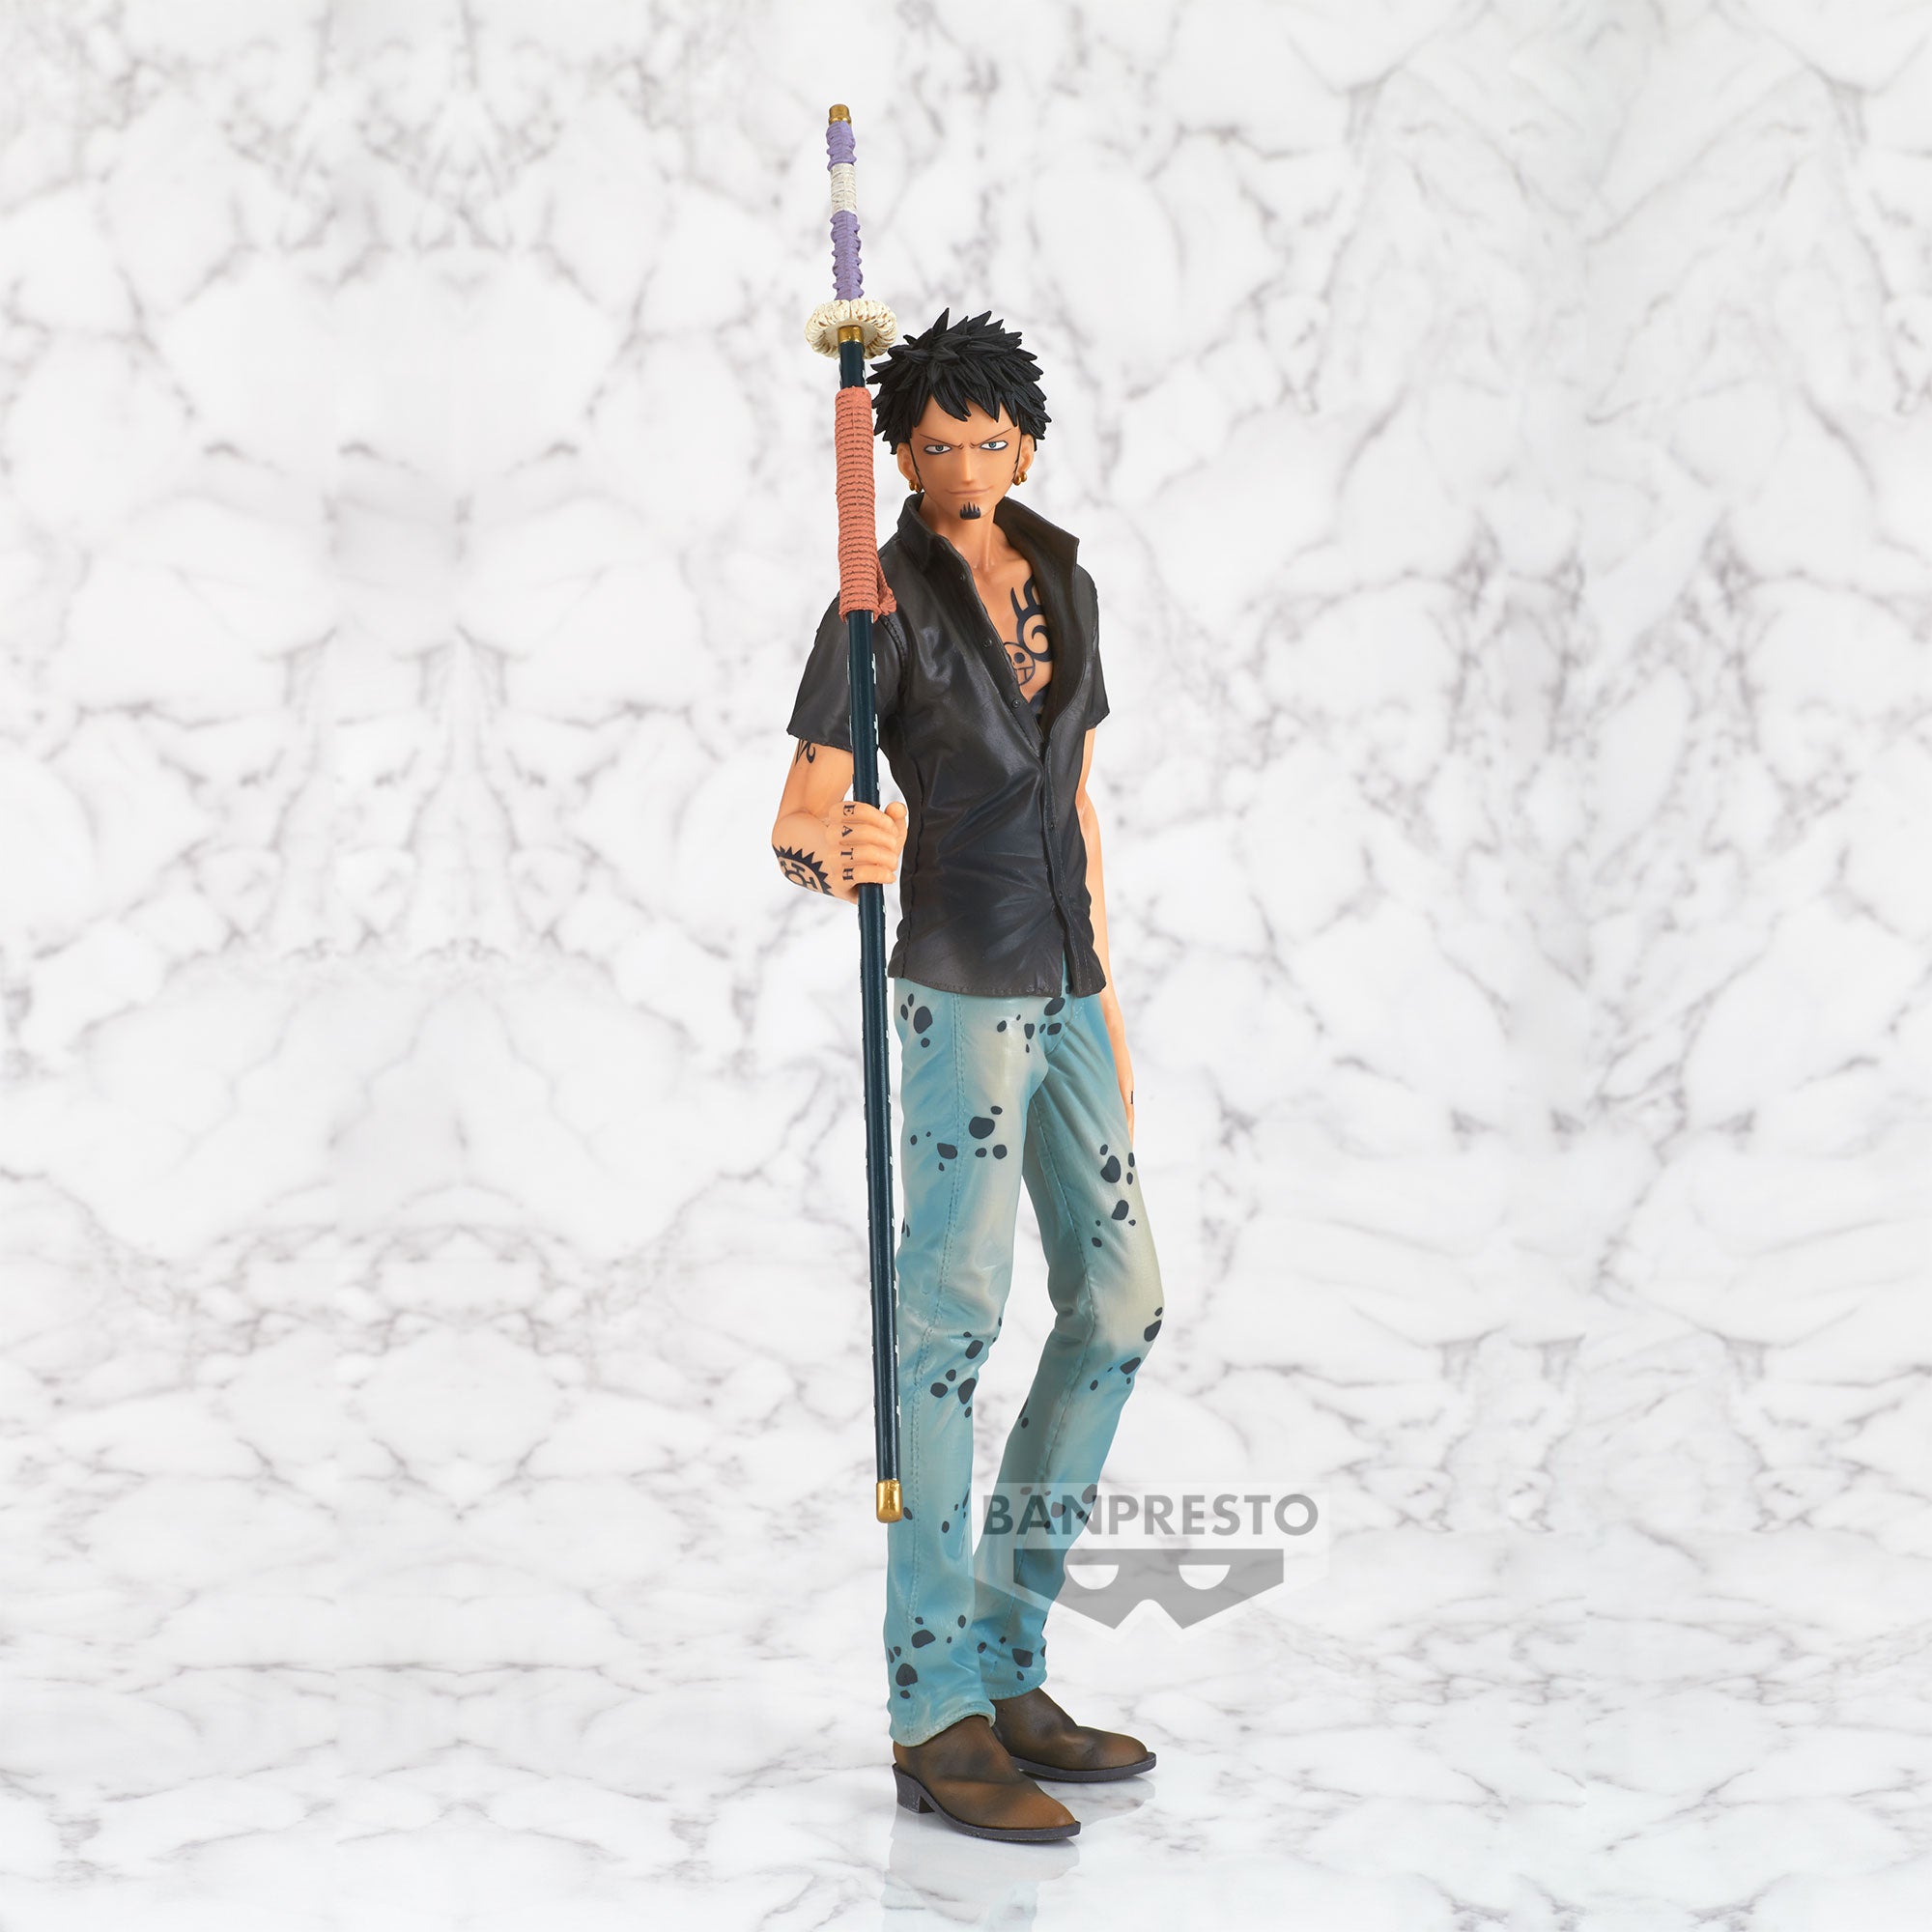 Limited Large Size Anime One Piece Trafalgar Law PVC Action Figure Statue